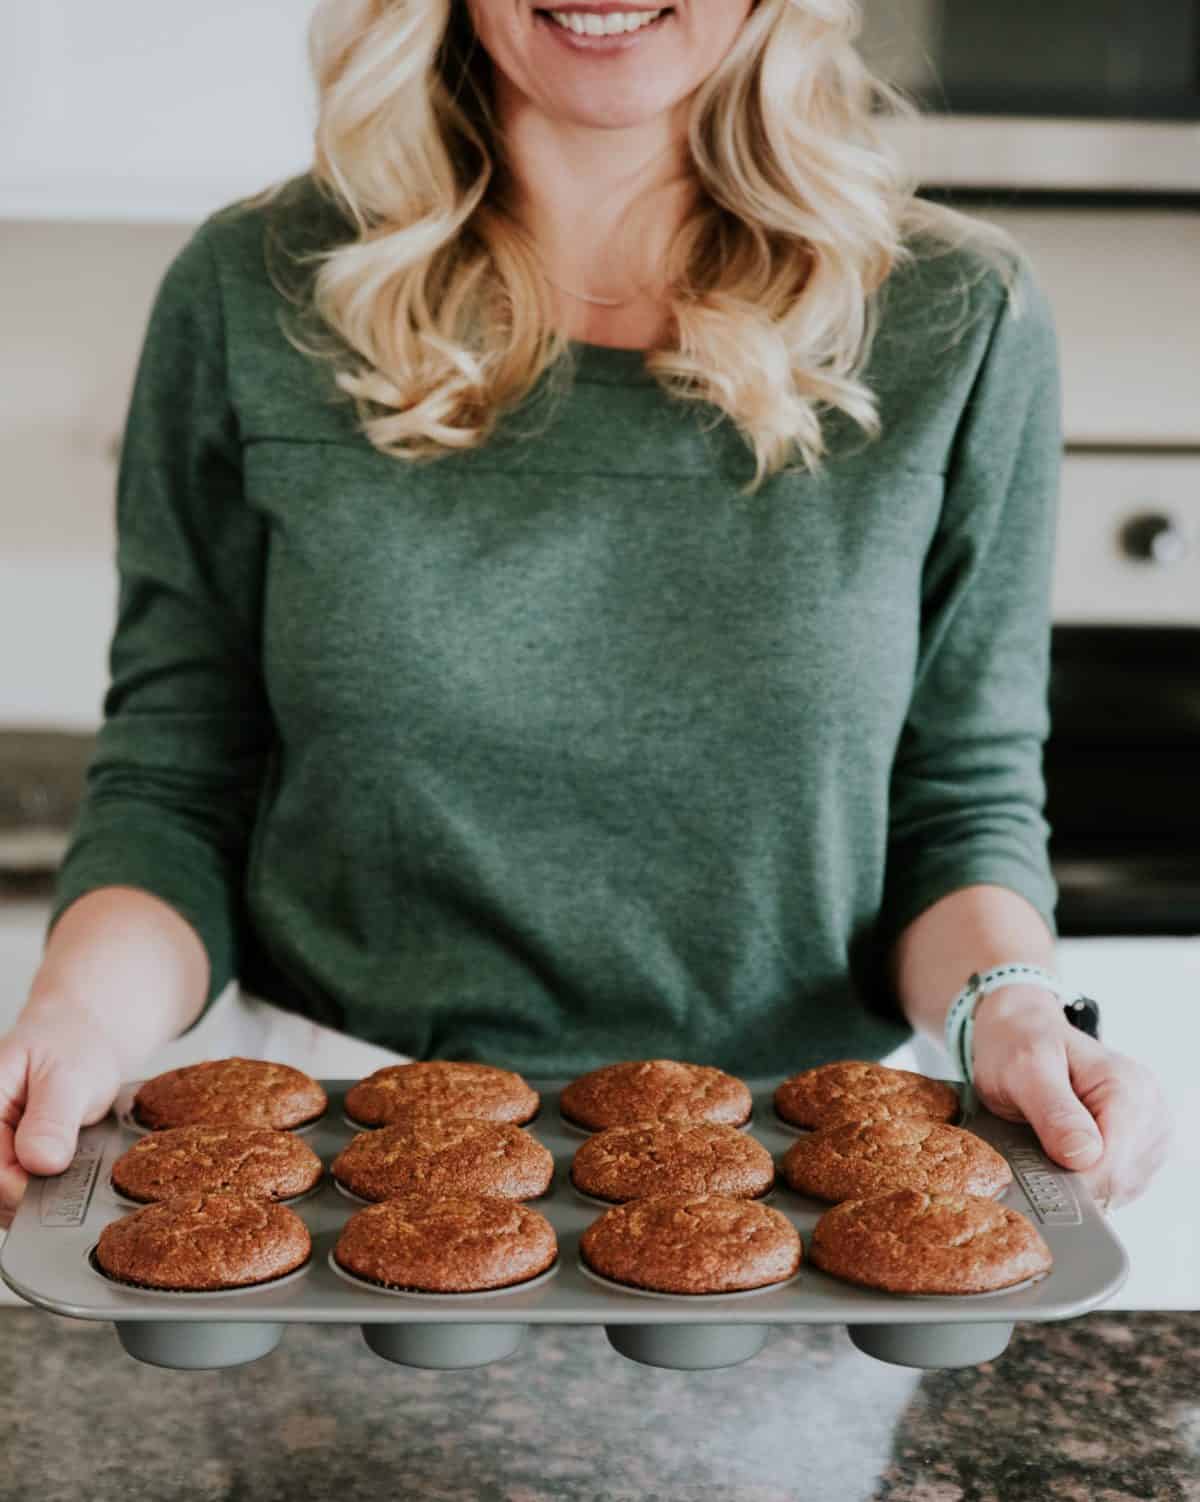 Chelsea Plummer holding a tray of muffins